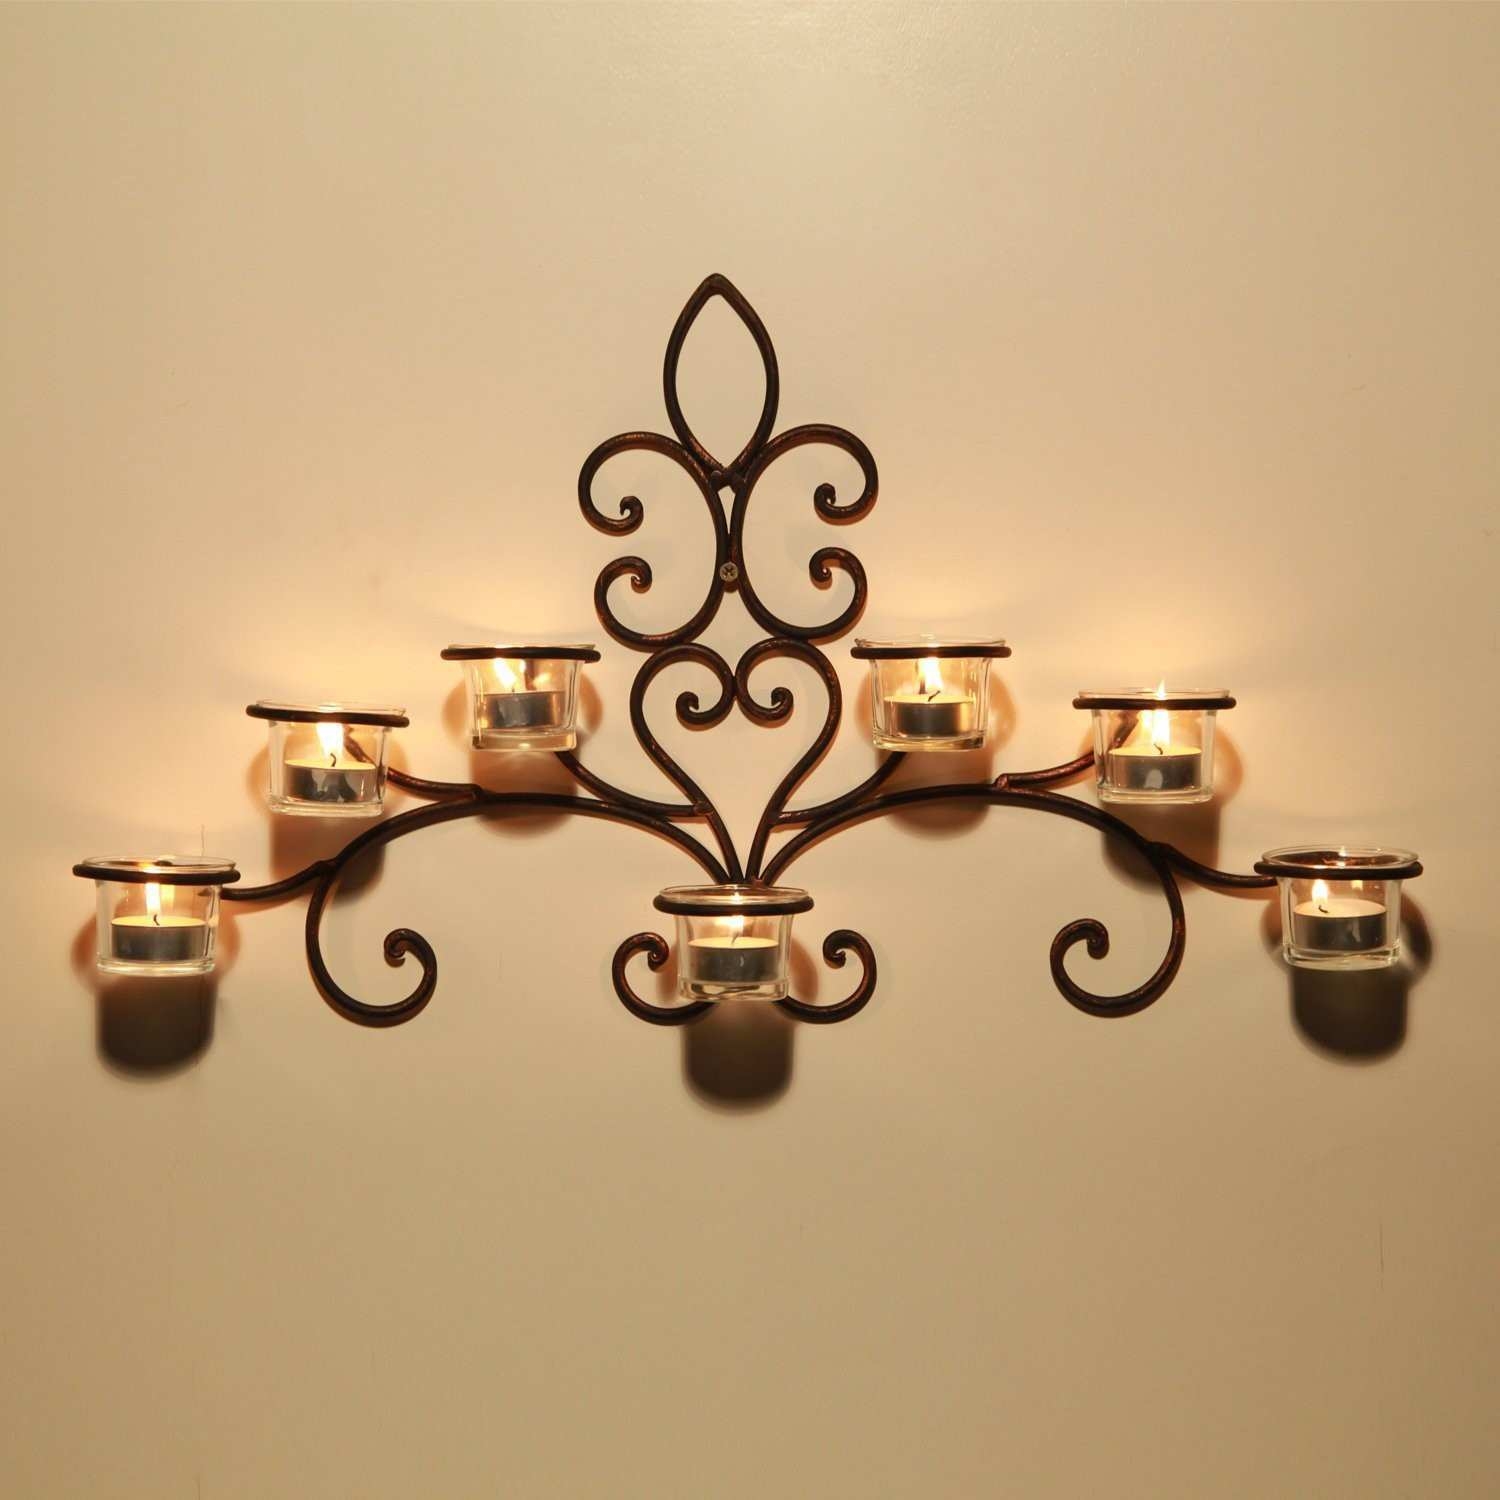 Polishing Decorative Wall Mounted Tea Candle Stand at Best Price in  Moradabad | Banke Bihari Import And Export